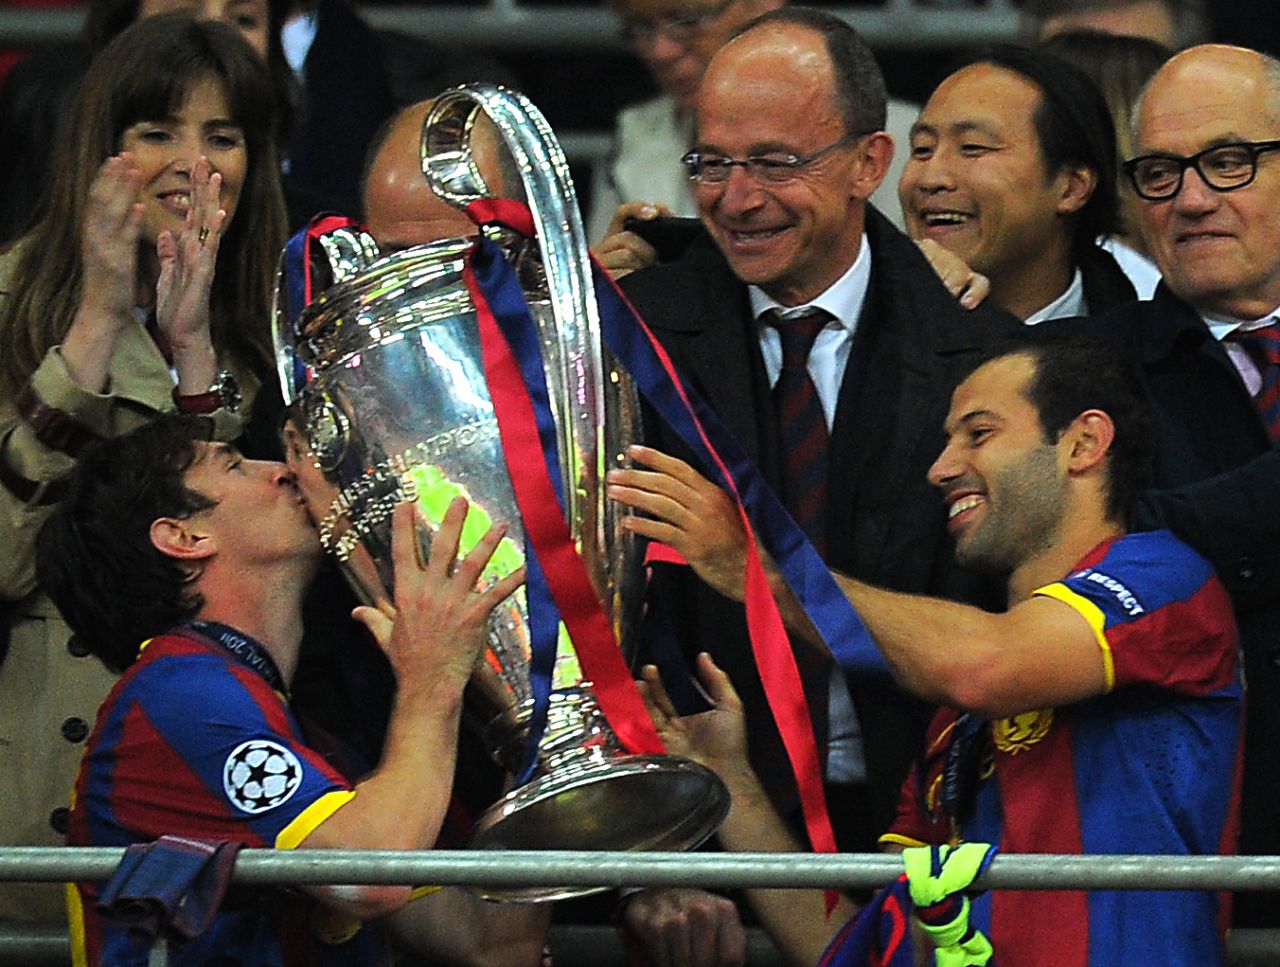 Messi haunted Manchester United in a Champions League final for the second time in 2011 when he scored the second goal as Barca beat the English Champions 3-1 at Wembley. It was Barca's third European triumph in six years.